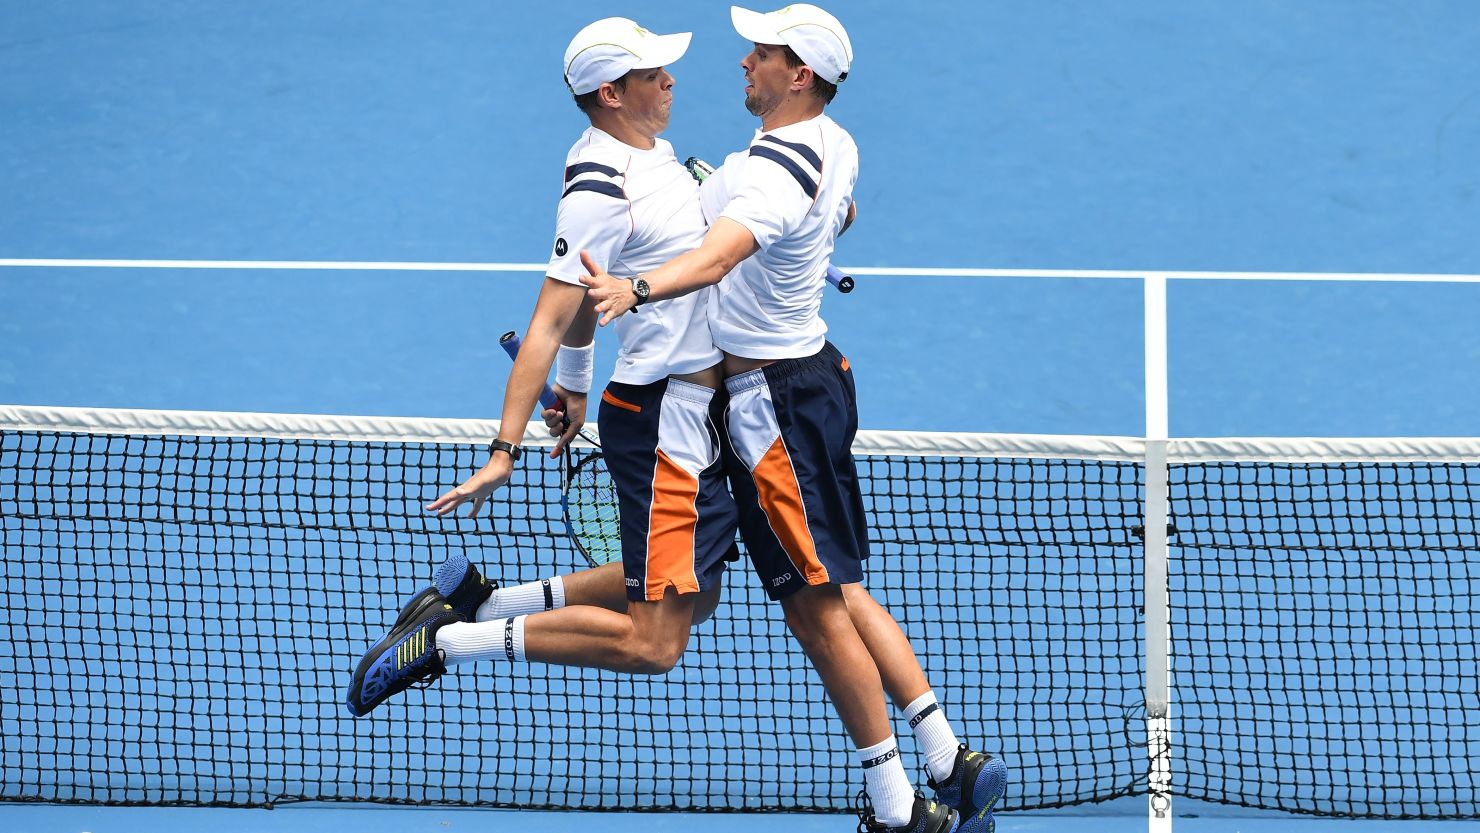 The Bryan brothers perform their trademark chest bump celebration at the 2018 Australian Open.